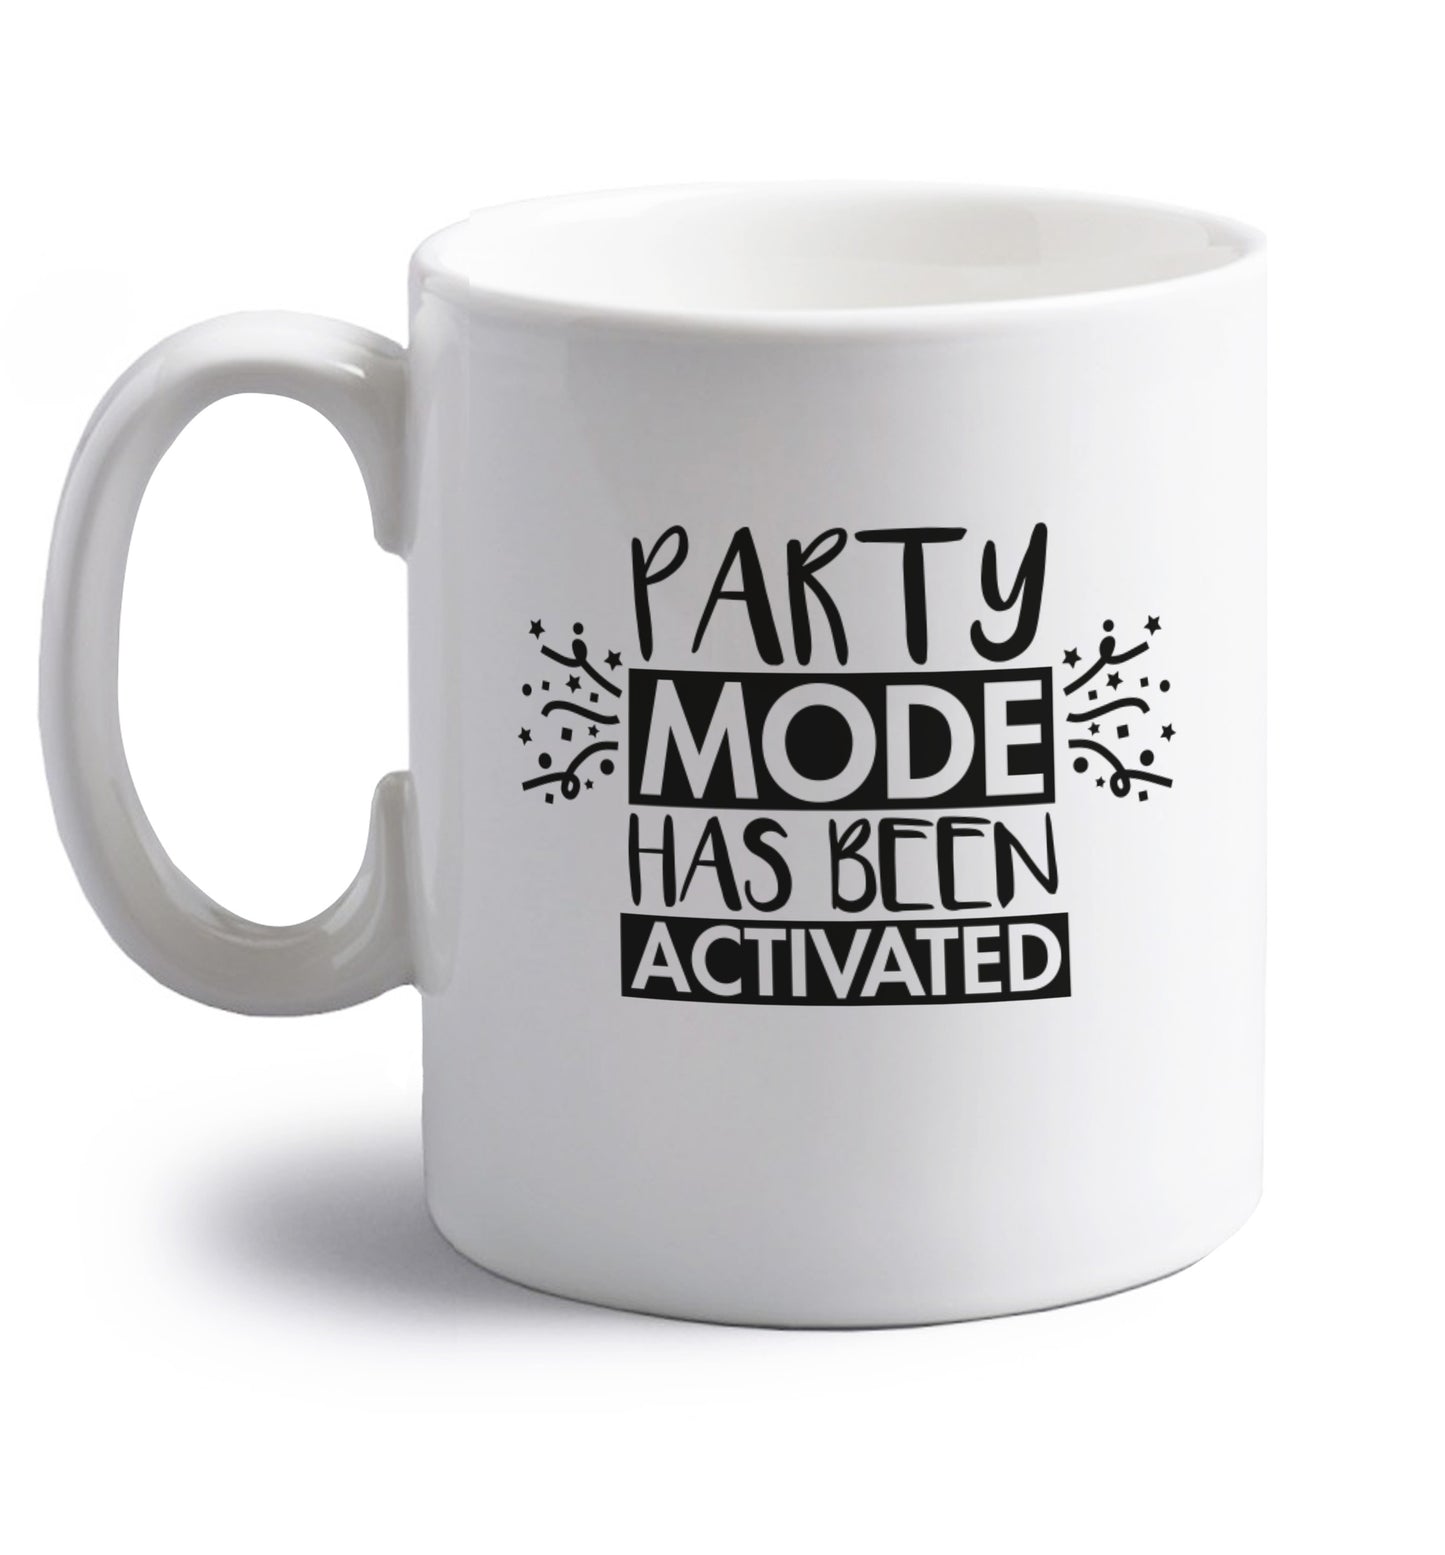 Please do not disturb party mode has been activated right handed white ceramic mug 